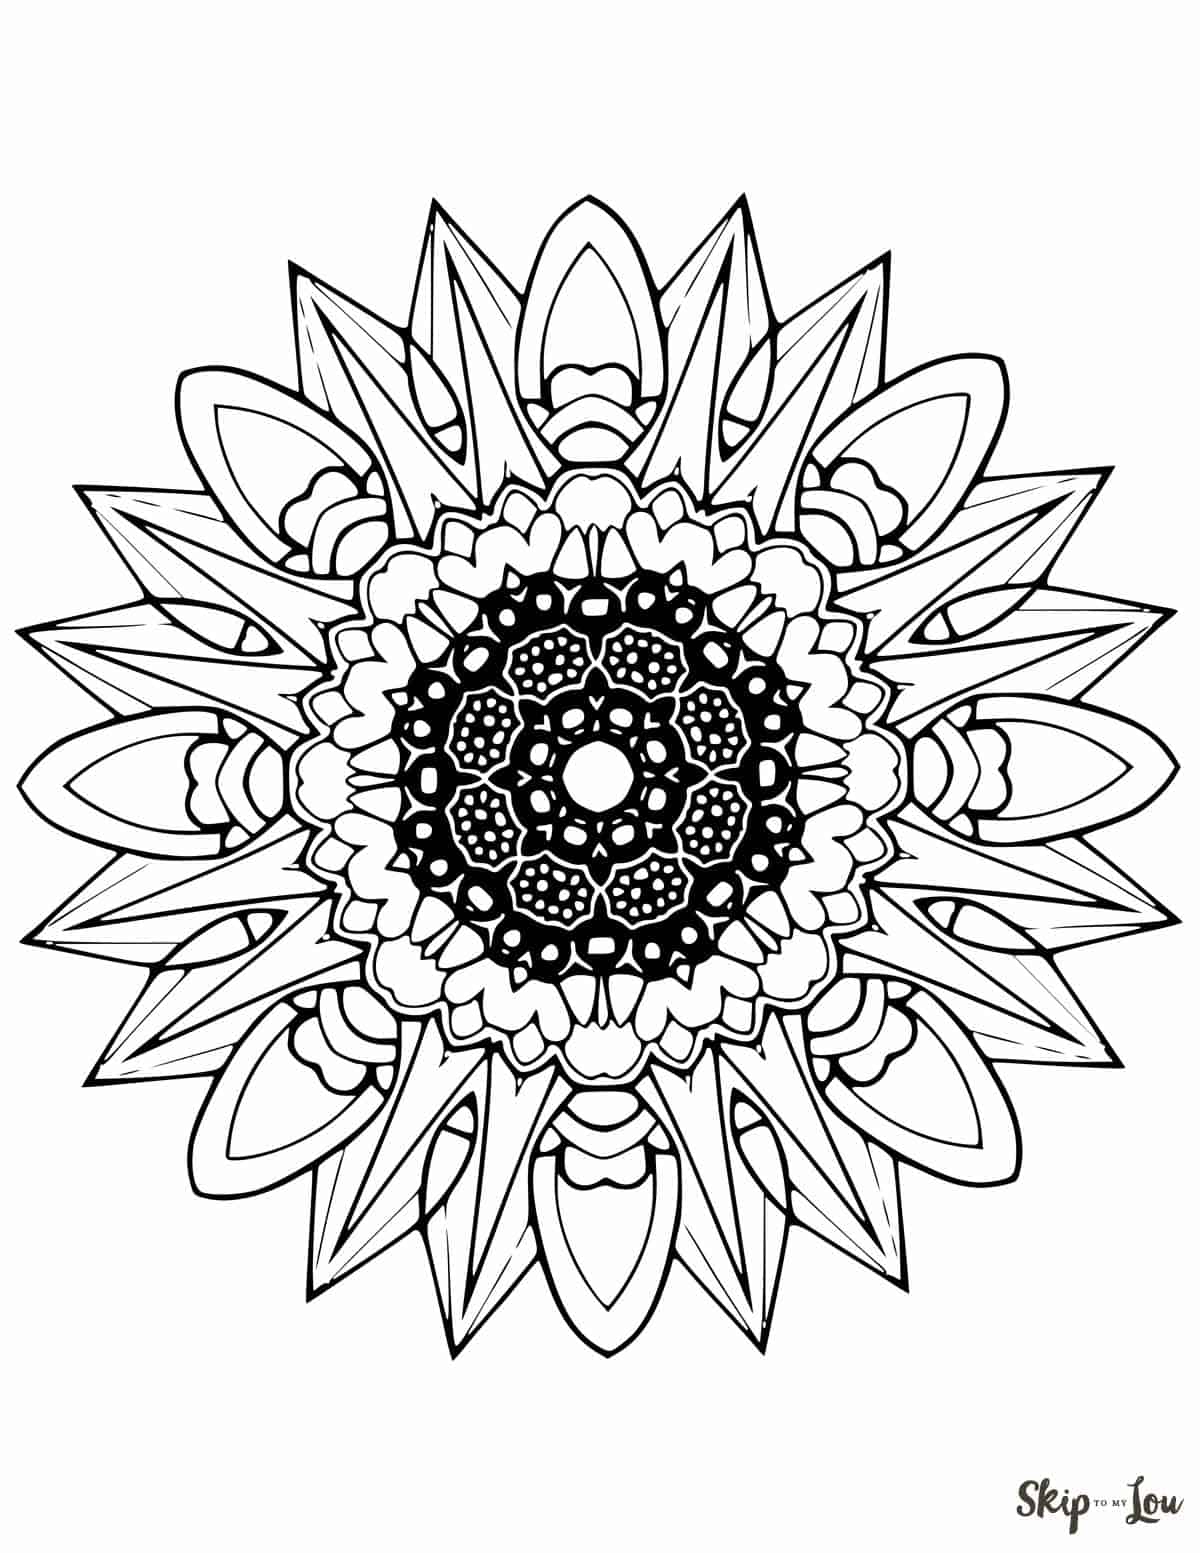 Color Your Stress Away With Mandala Coloring Pages Skip